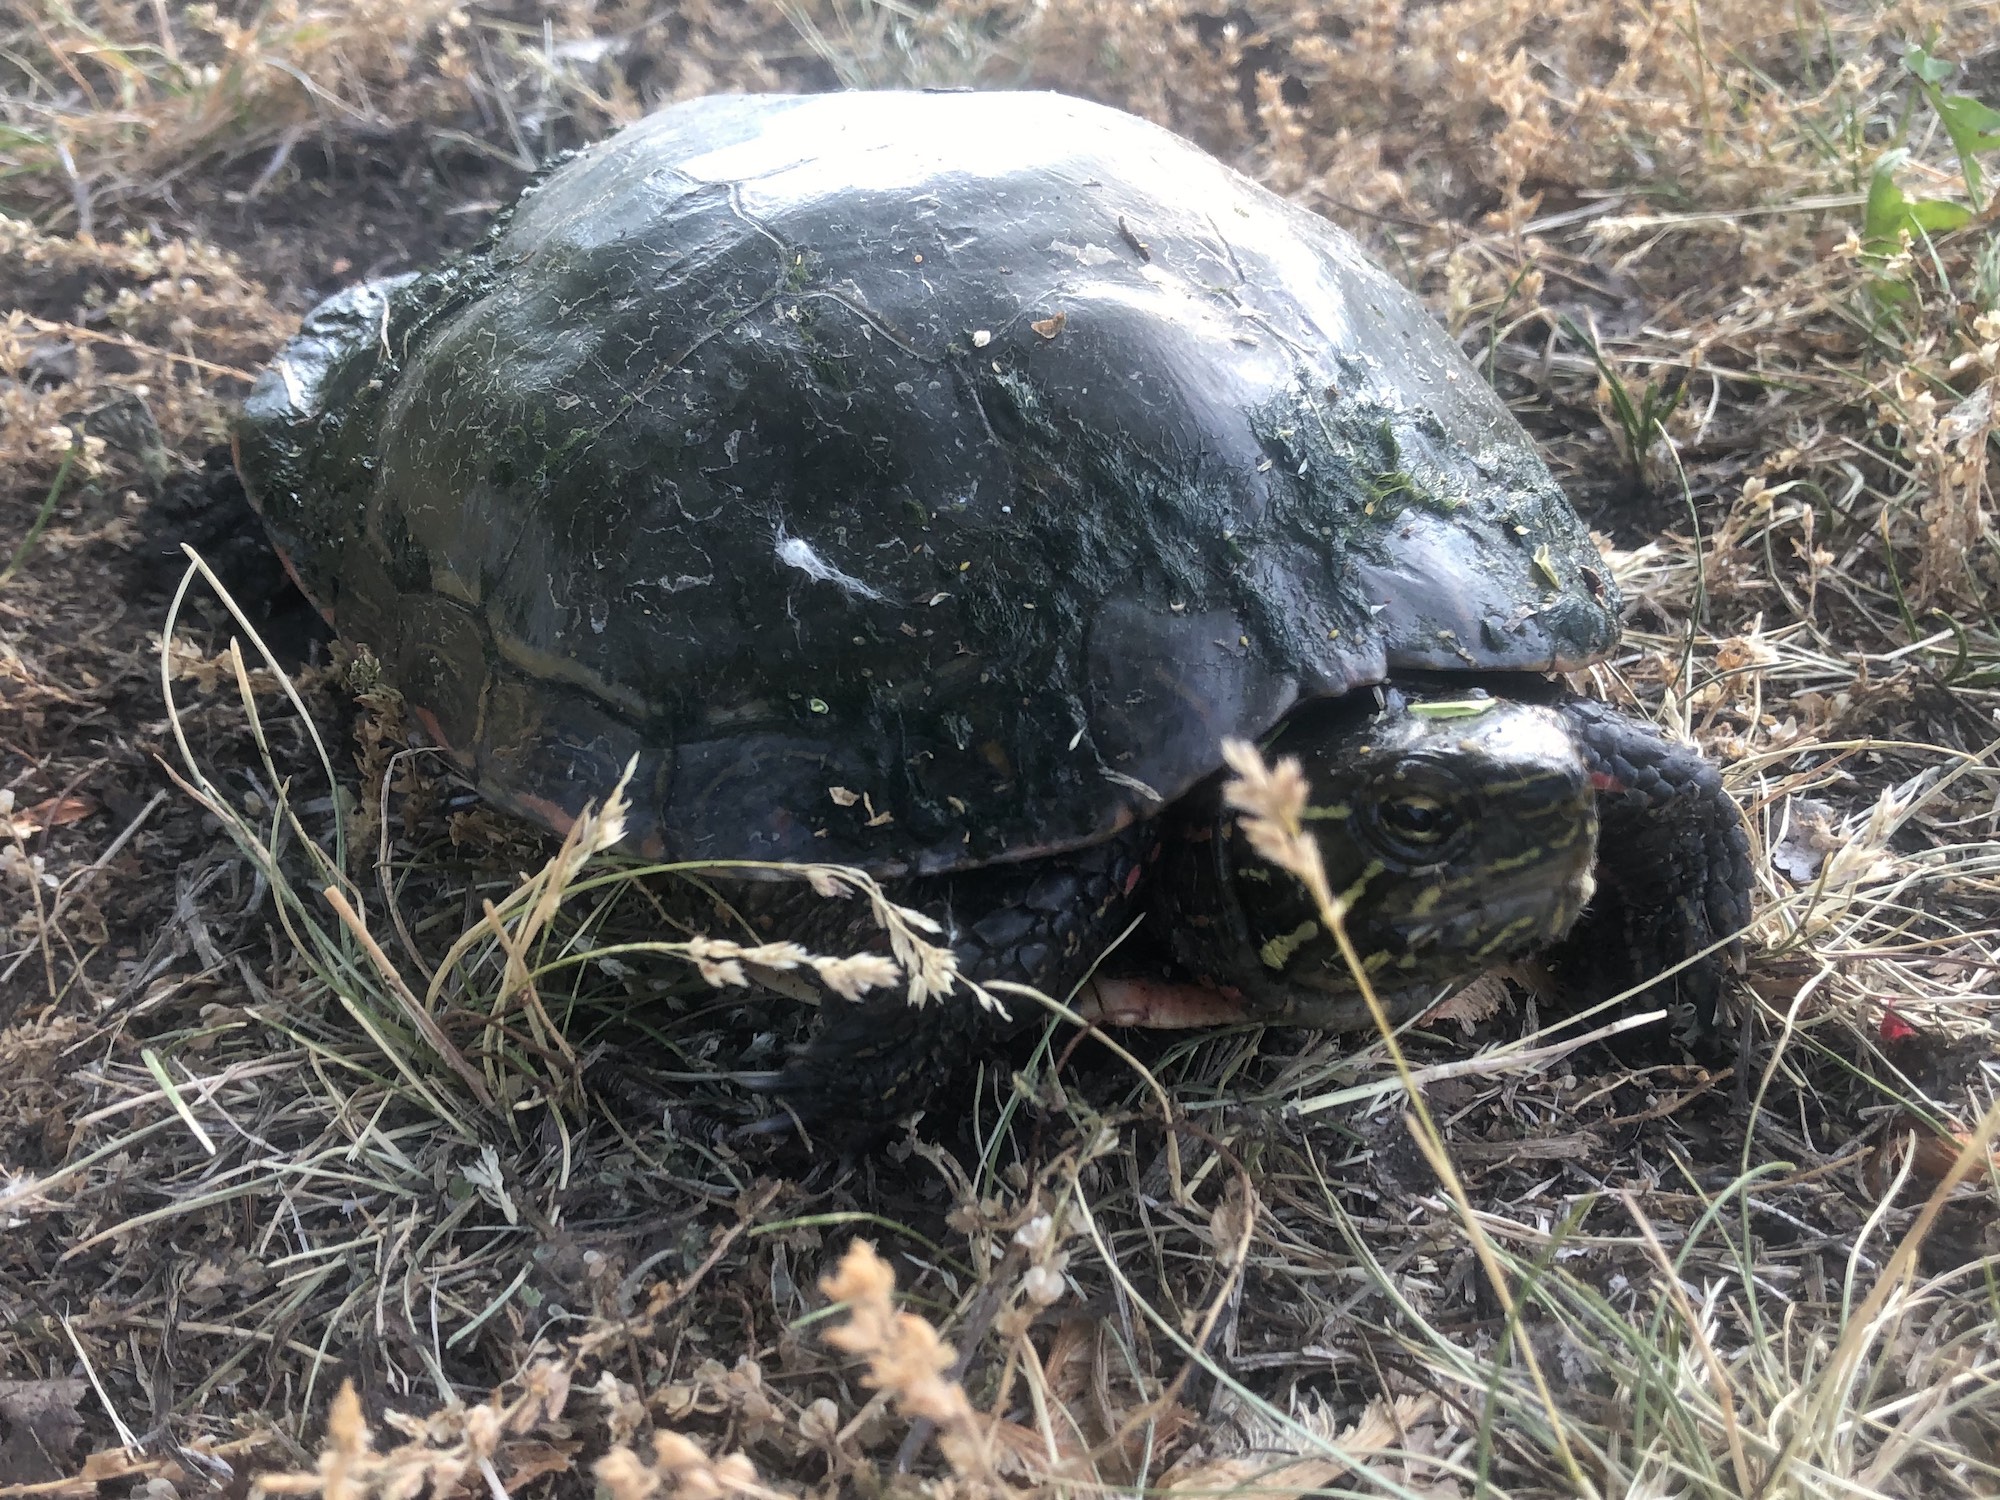 Painted Turtle laying eggs in E. Ray Stevens Aquatic Gardens in Madison, Wisconsin on June 10, 2021.